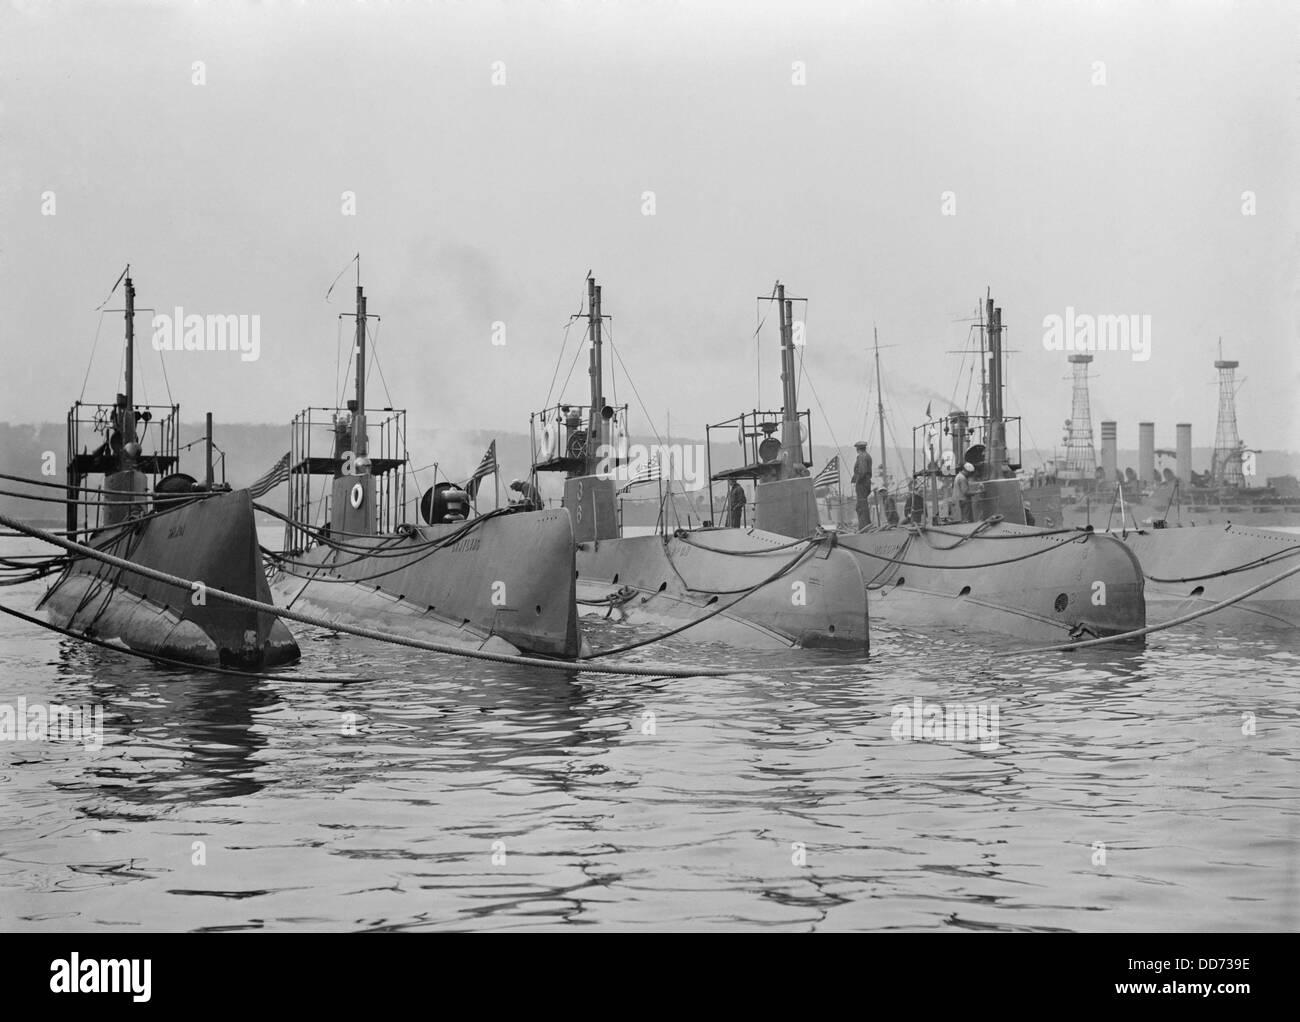 U.S. submarines participating in a naval review in New York City. 1911. L to R: Salem, Grayling, Itarpon, Octopus, Bonita, and Stock Photo